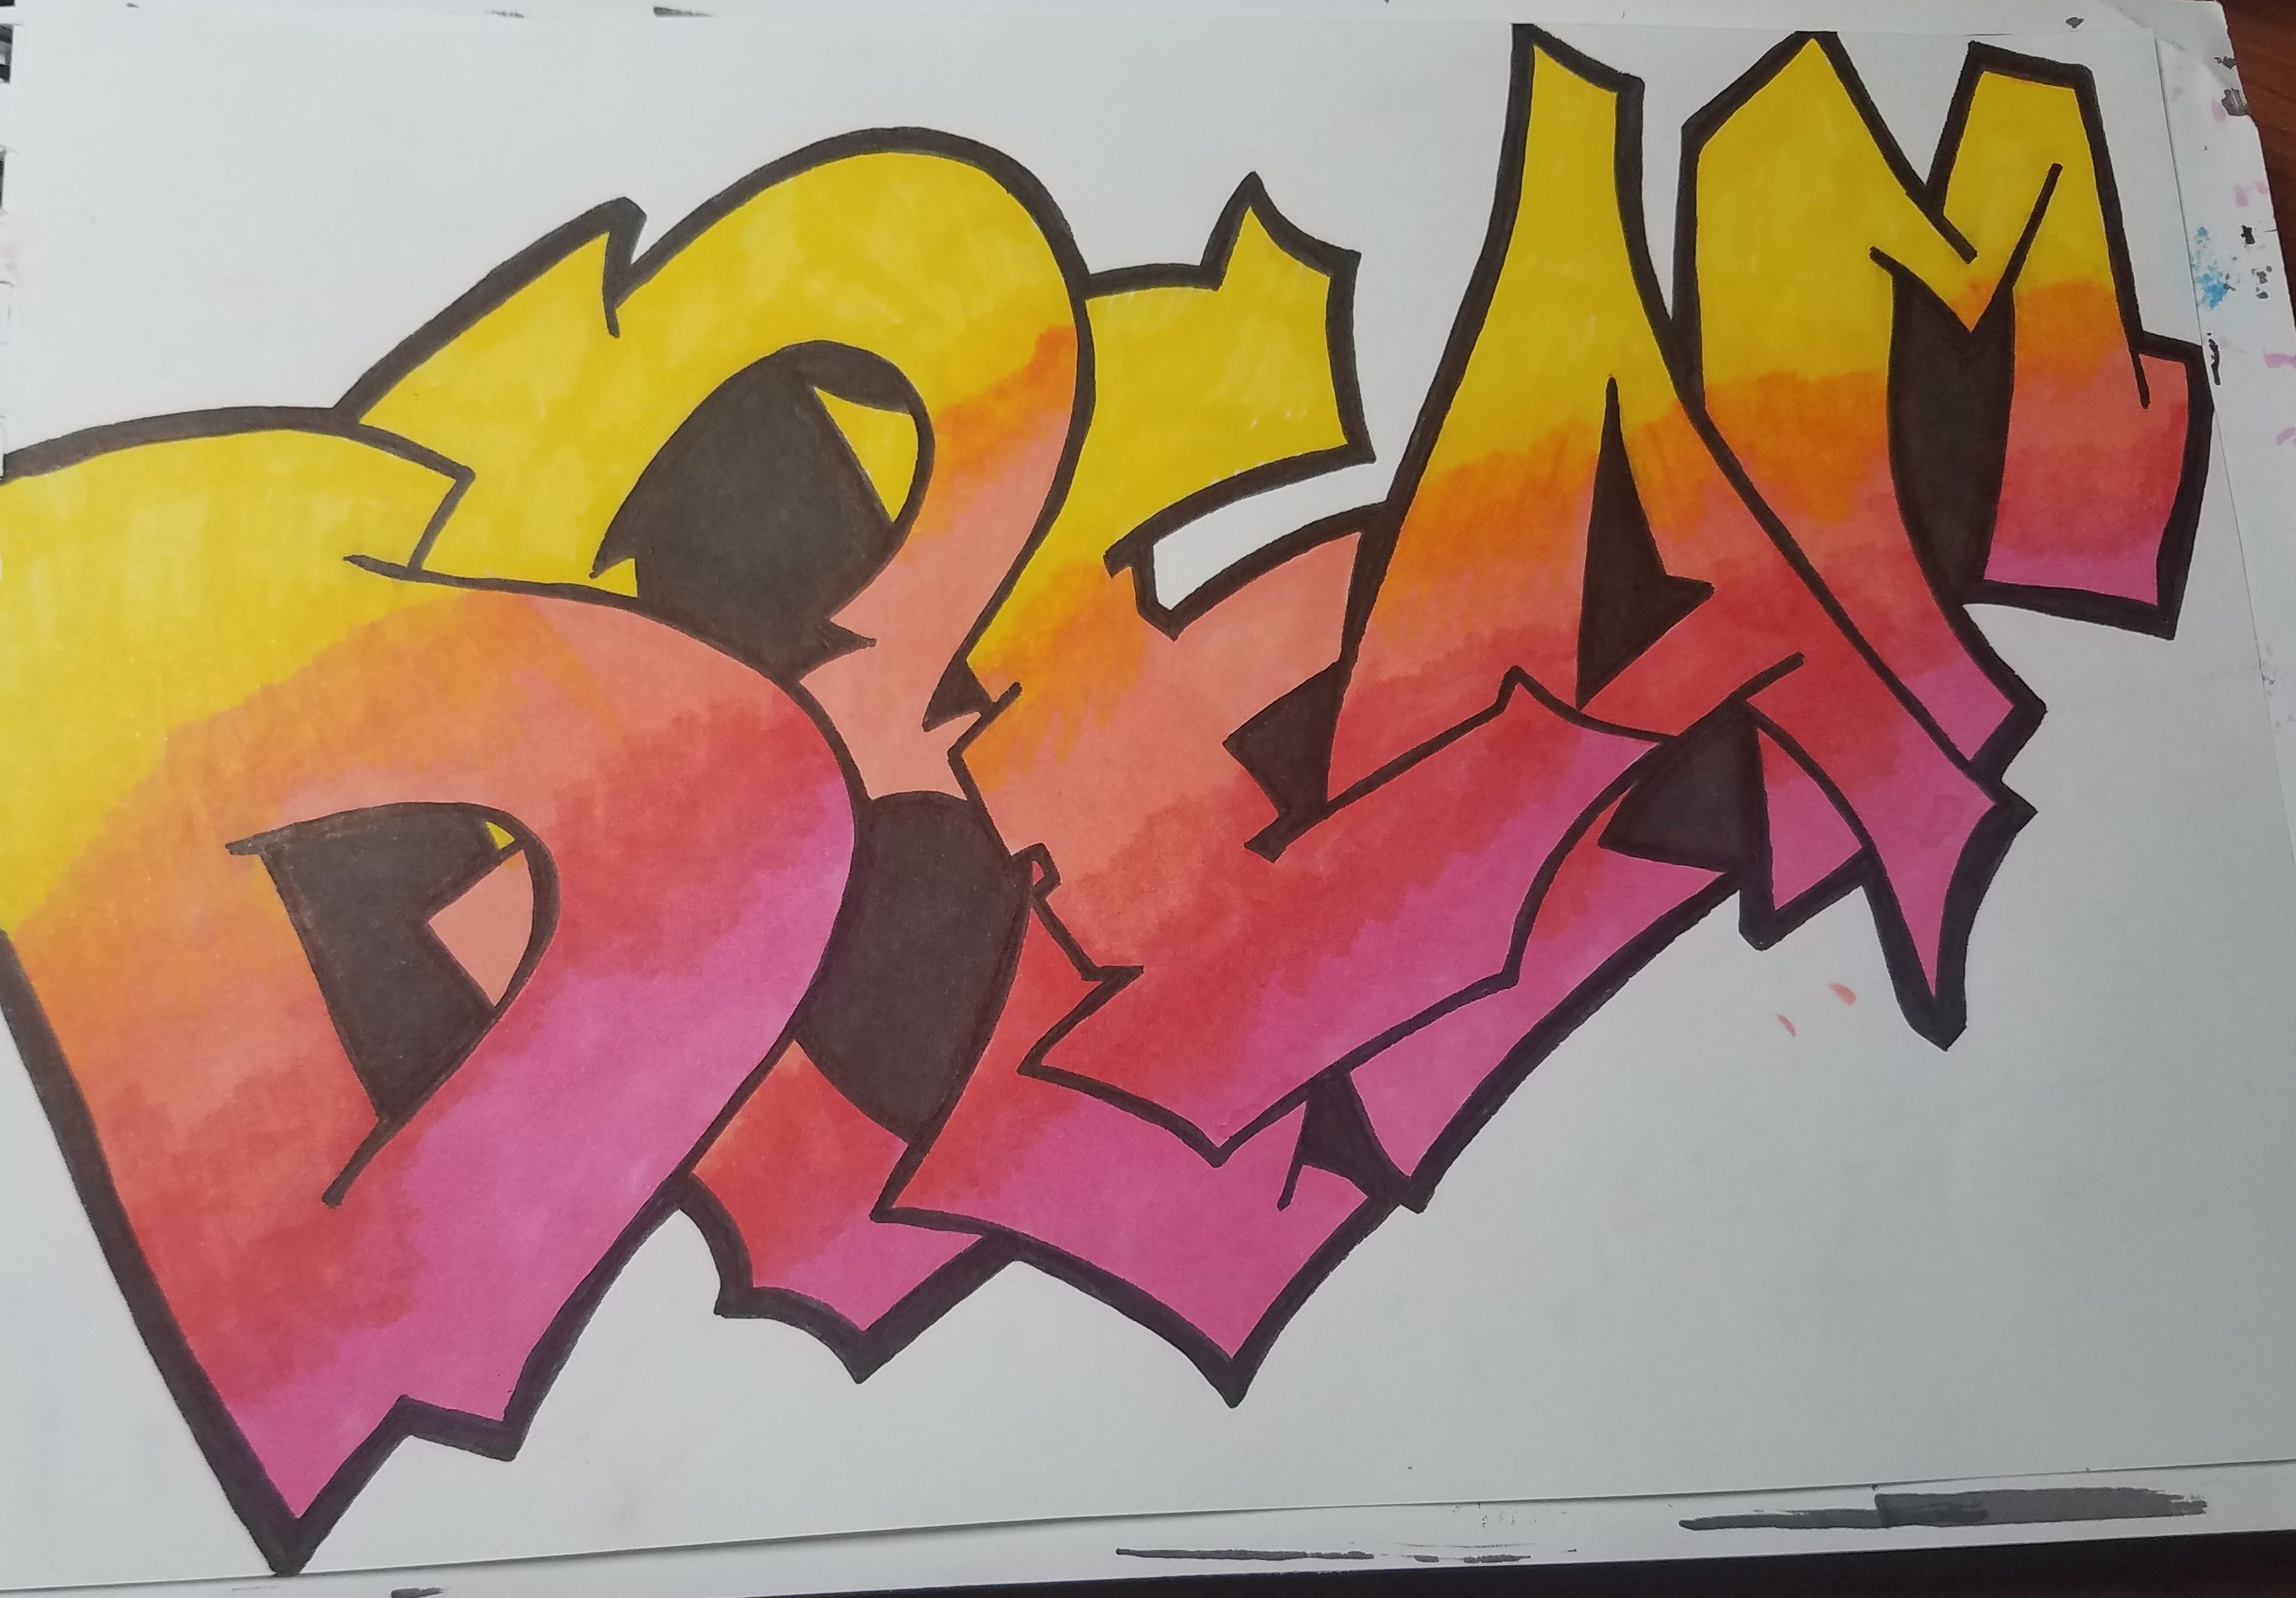 how to draw graffiti names step by step on paper